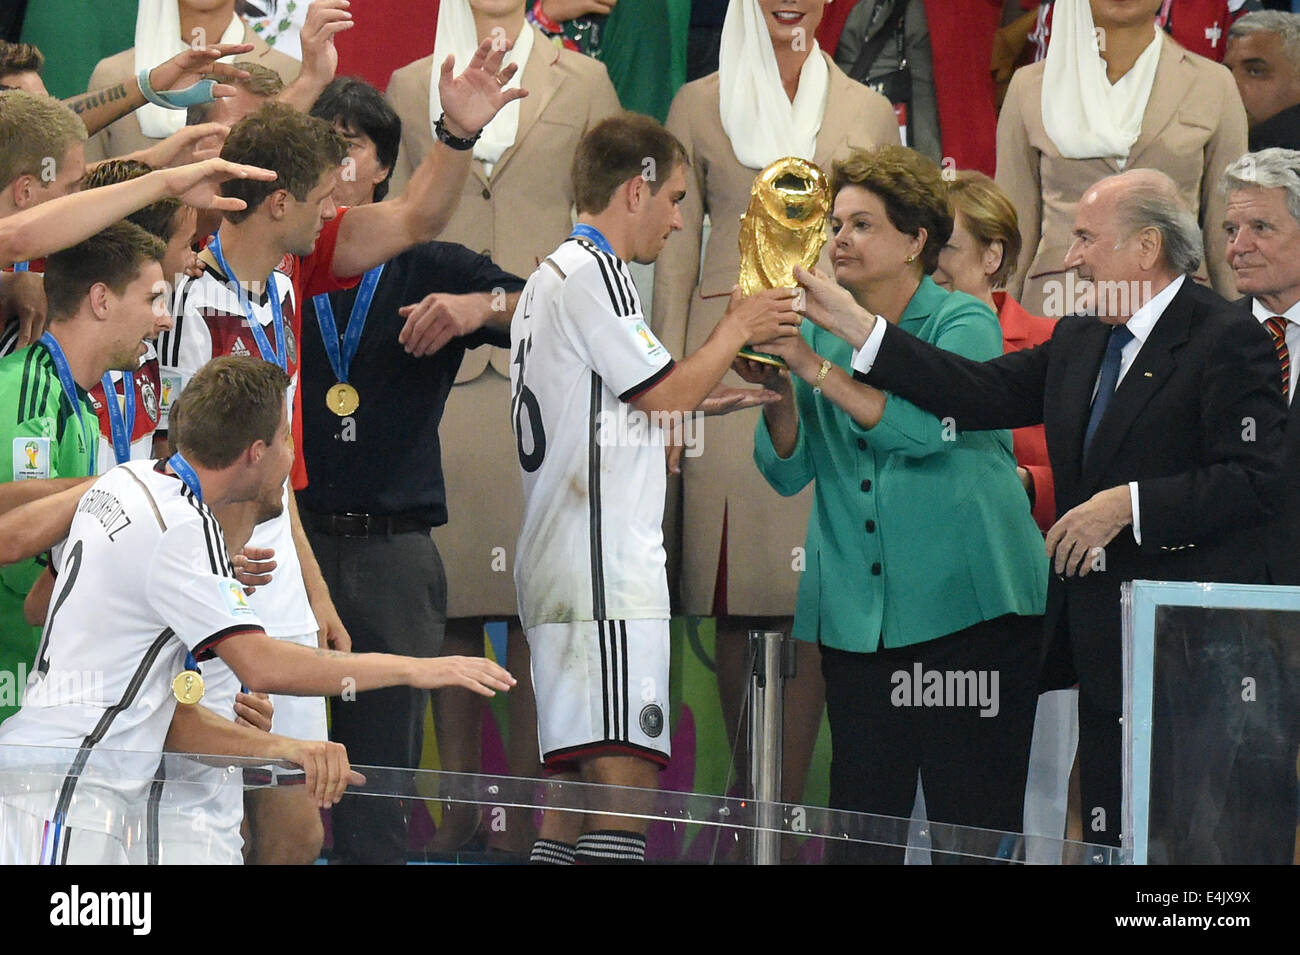 Rio de Janeiro, Brazil. 13th July, 2014. Philipp Lahm (C) of Germany receives the Wolrd Cup trophy from Brazil's President Dilma Rousseff (4-R) next to German Chancellor Angela Merkel (3-R), German FIFA President Sepp Blatter (2-R) and German President Joachim Gauck (R) after the FIFA World Cup 2014 final soccer match between Germany and Argentina at the Estadio do Maracana in Rio de Janeiro, Brazil, 13 July 2014. Photo: Marcus Brandt/dpa/Alamy Live News Stock Photo